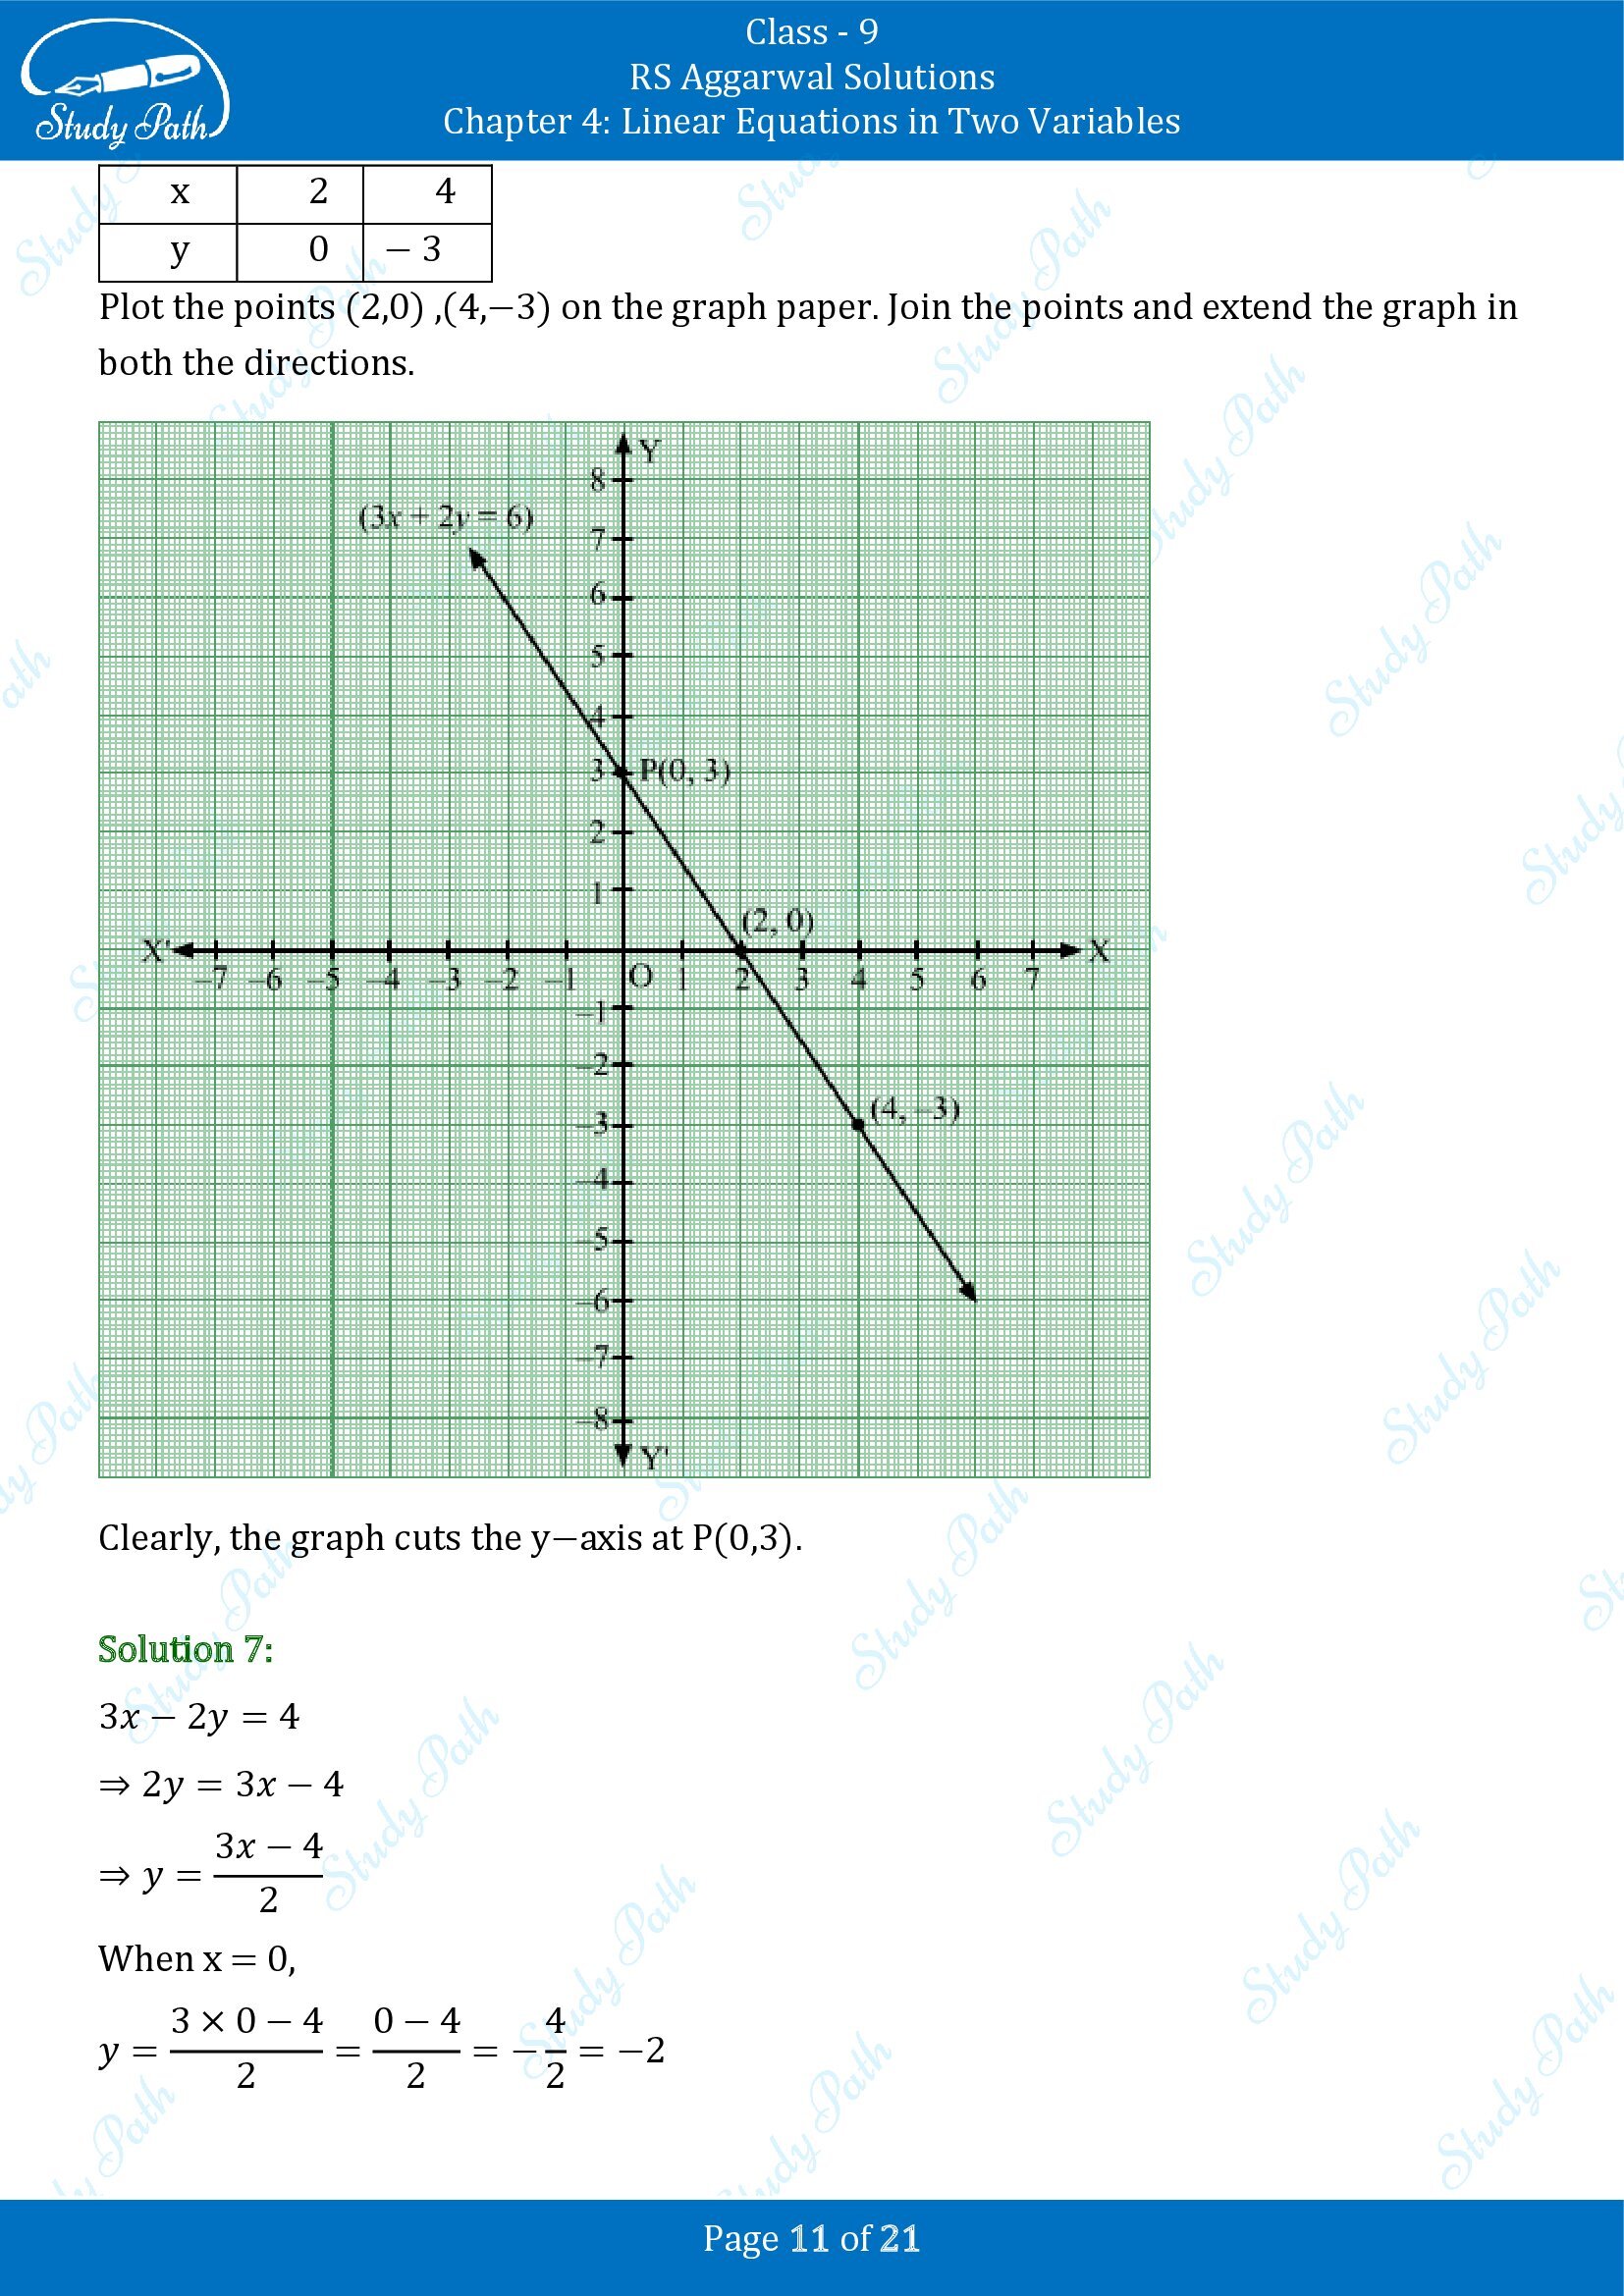 RS Aggarwal Solutions Class 9 Chapter 4 Linear Equations in Two Variables Exercise 4B 00011